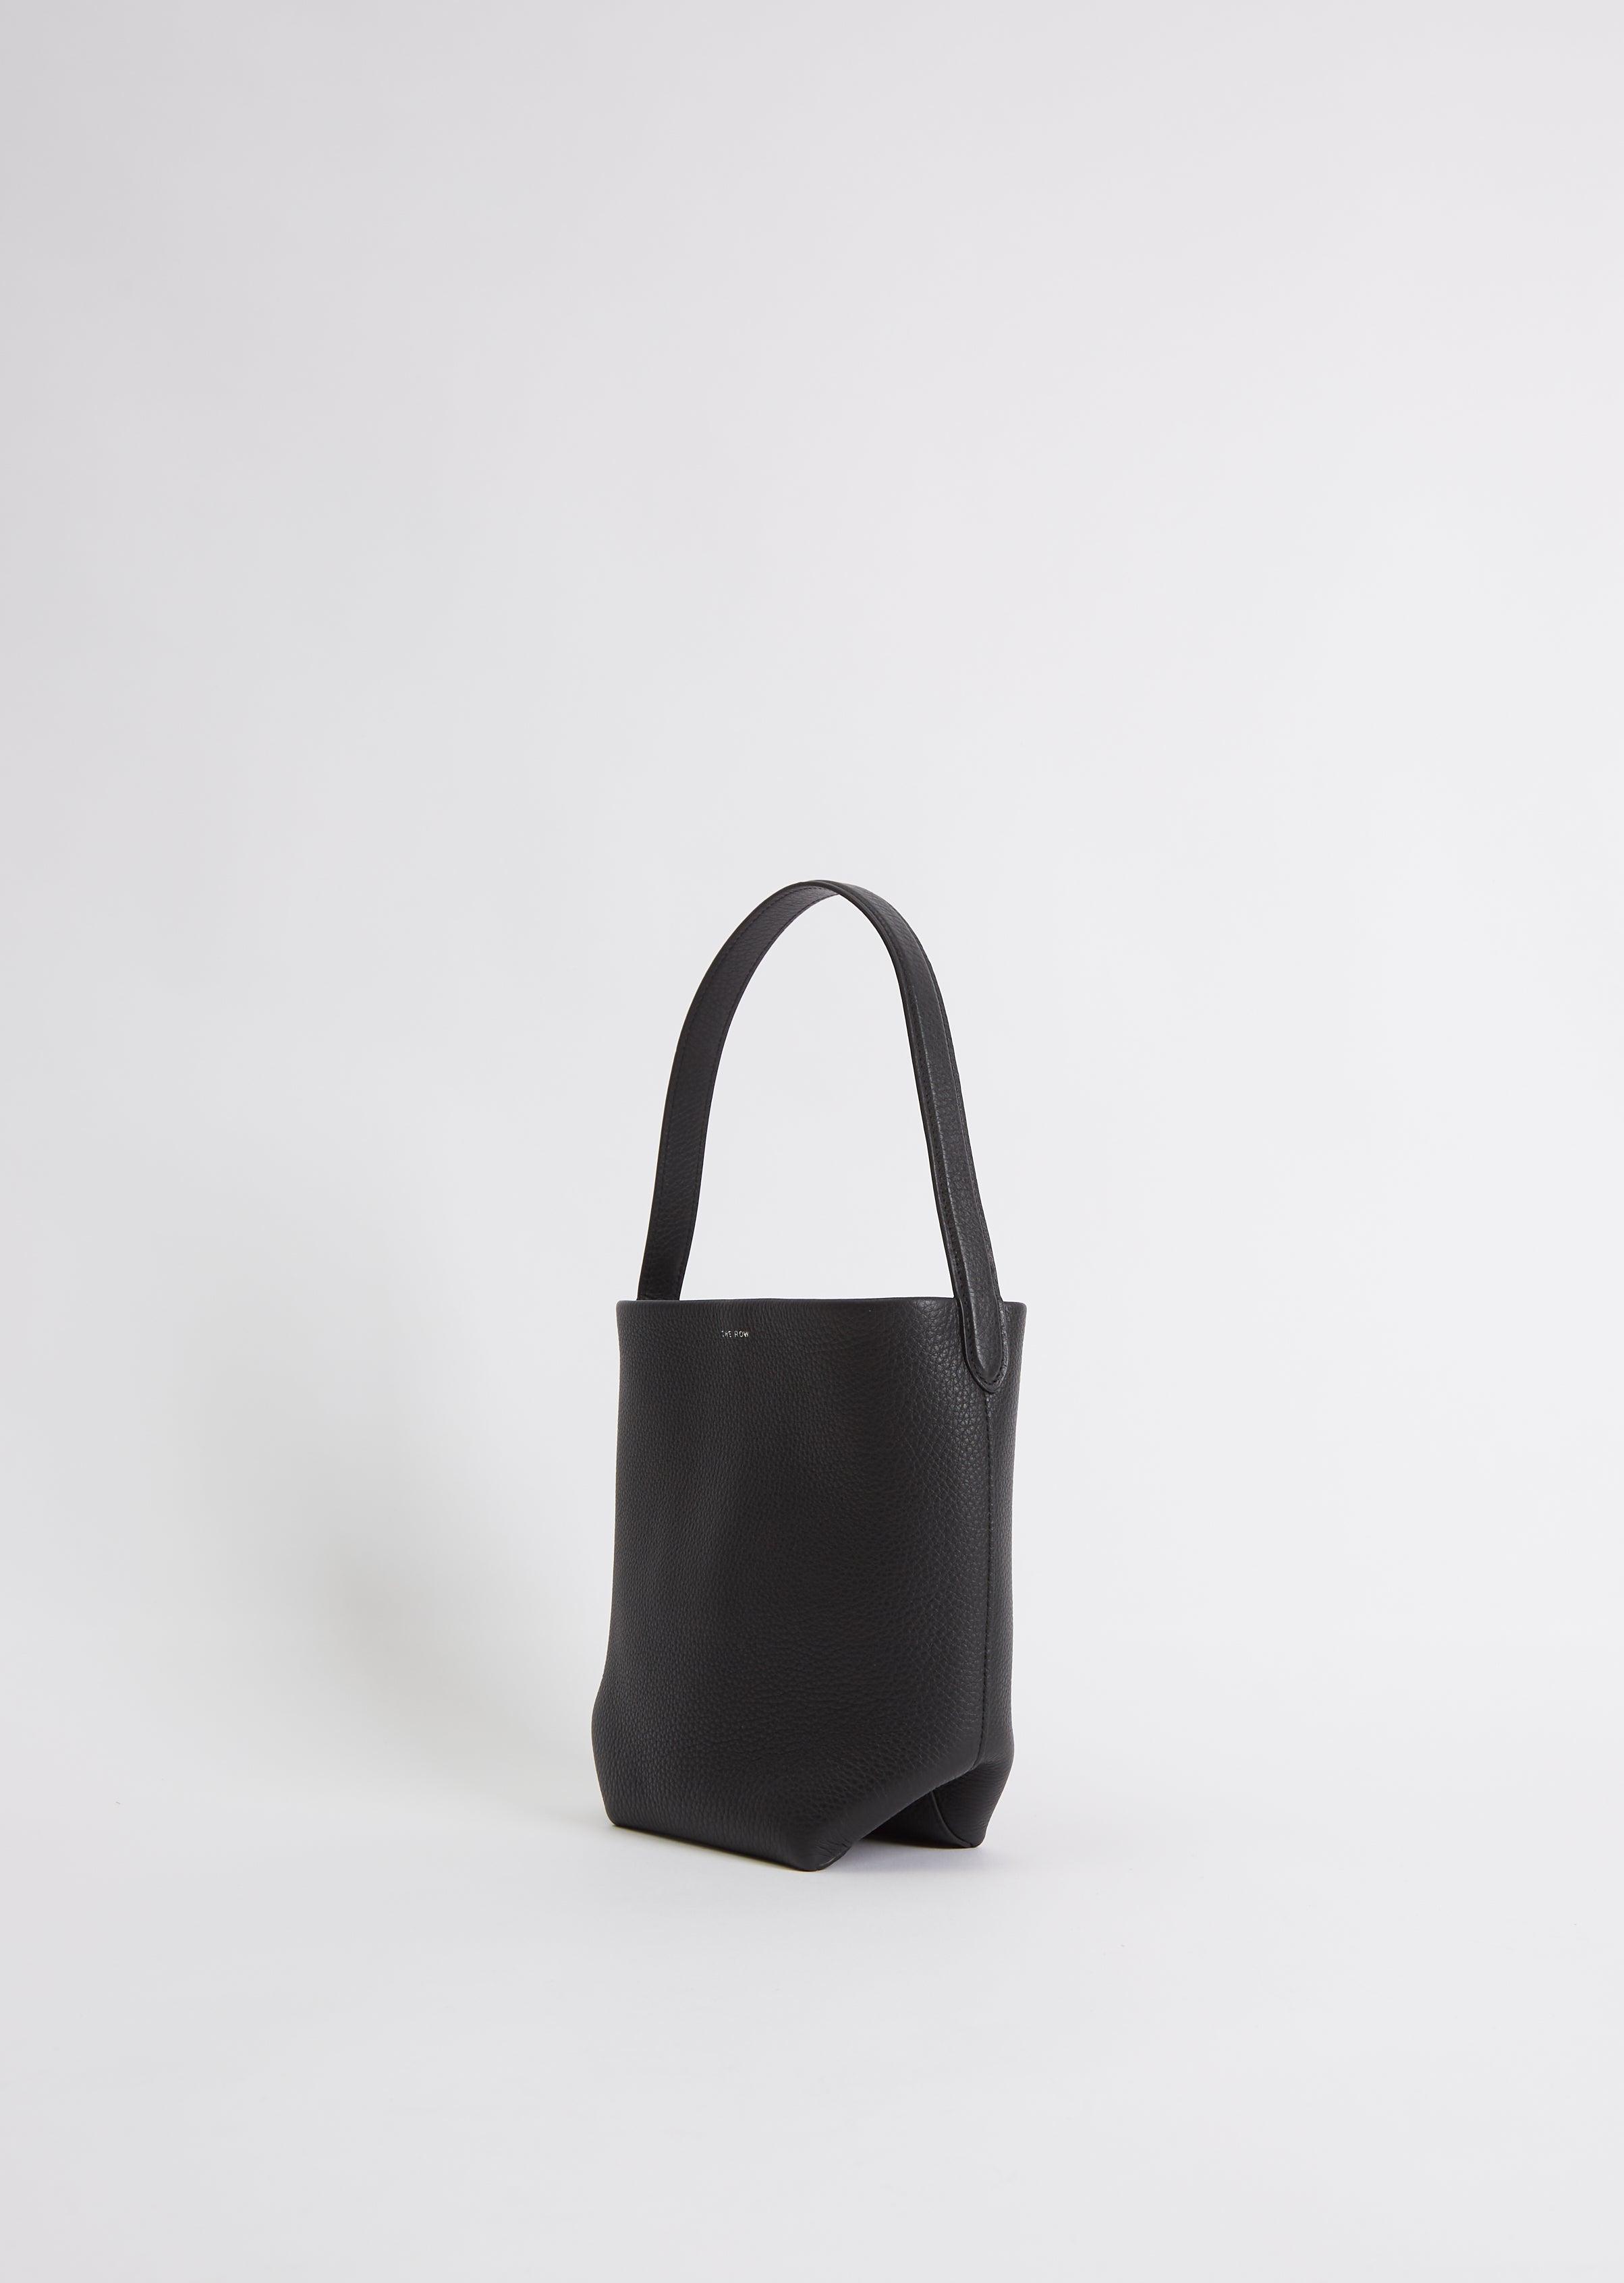 The Row N/S Park Tote Bag - ShopStyle